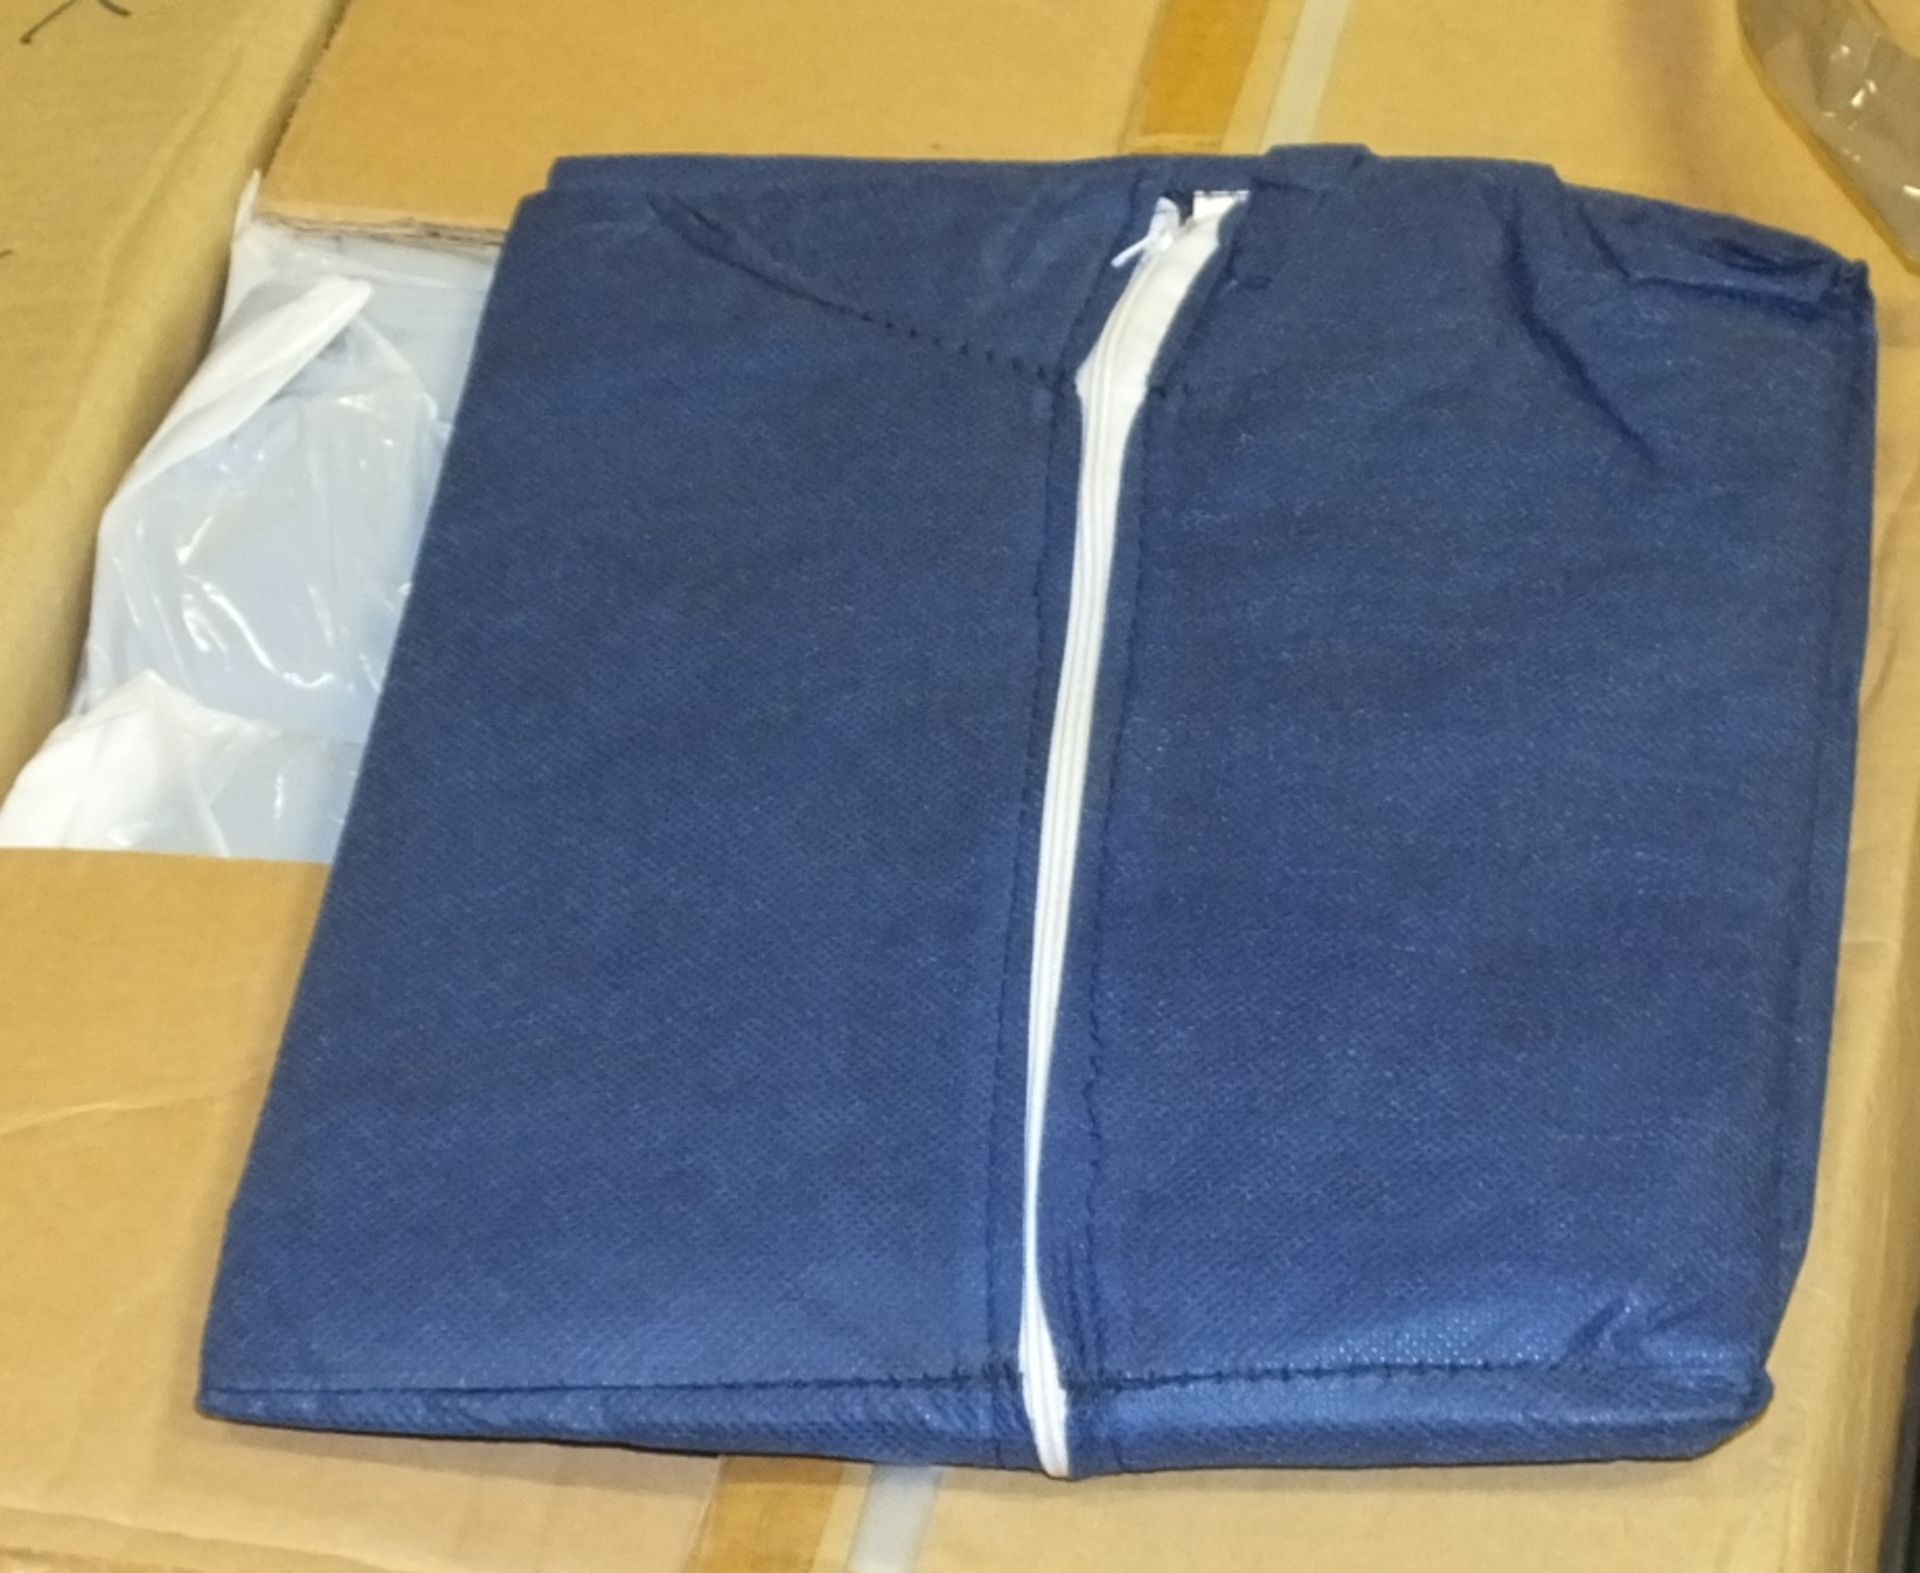 Medical Spares - Disposable Overalls - Image 2 of 2